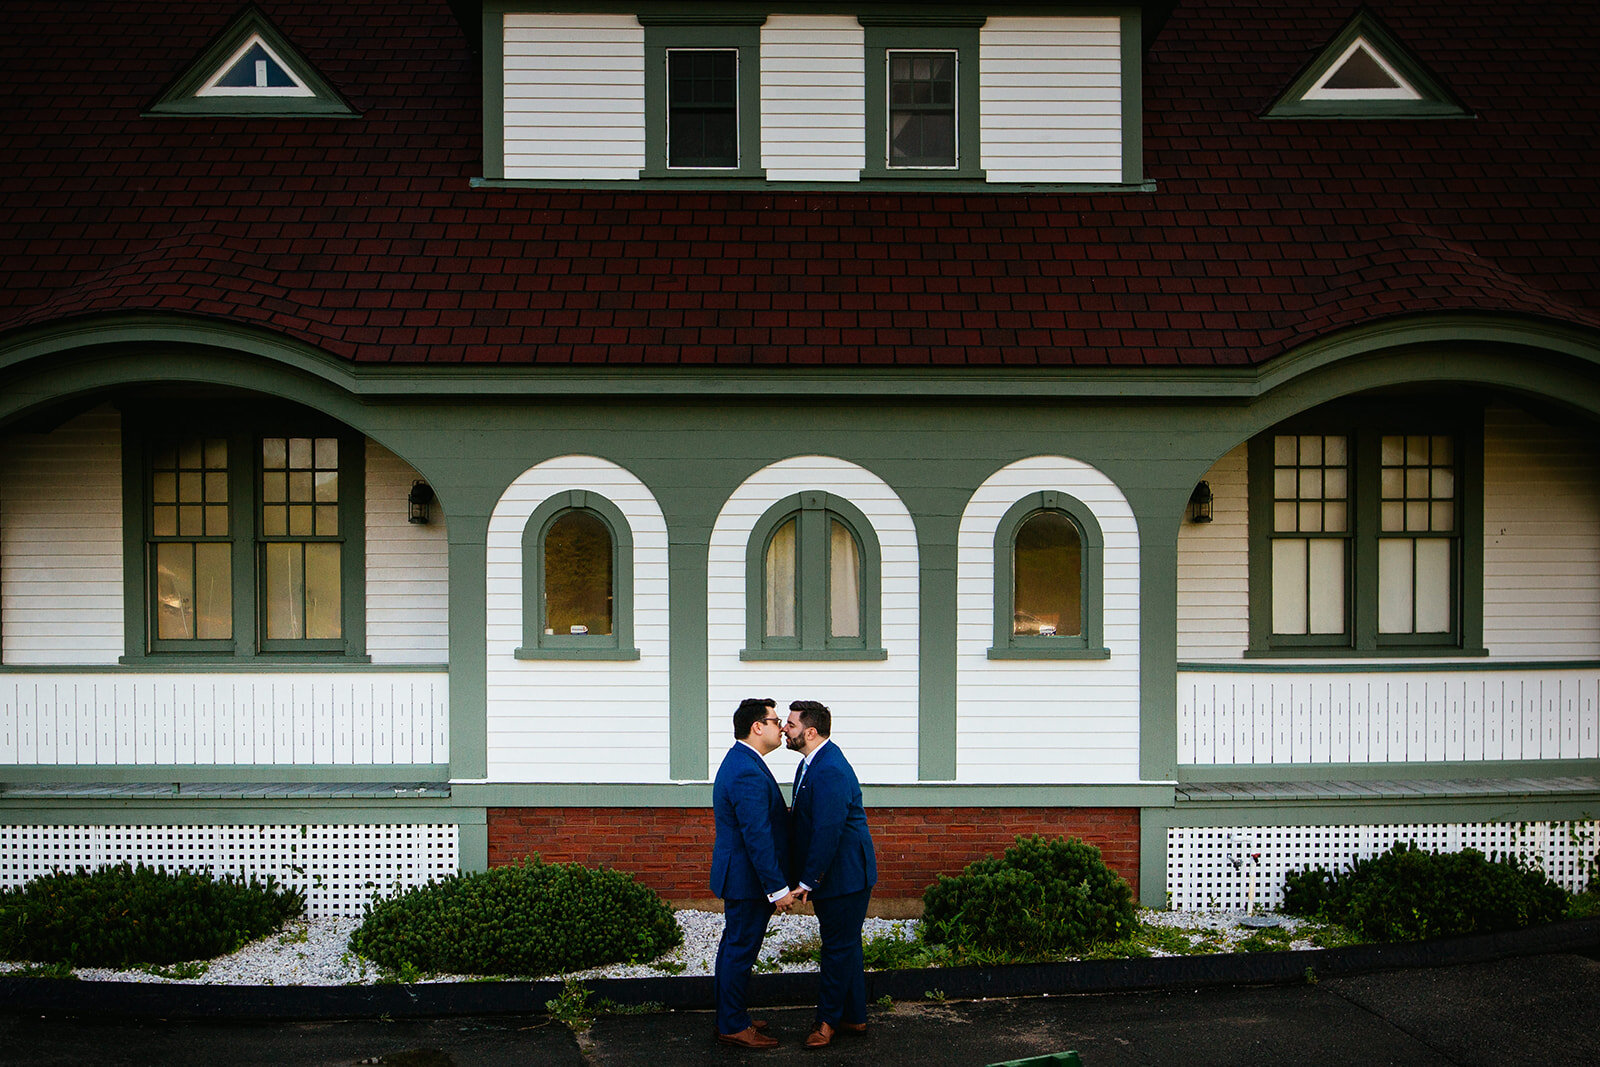 Grooms leaning in for a kiss by a green and white house on Peaks Island Portland ME Shawnee Custalow wedding photography